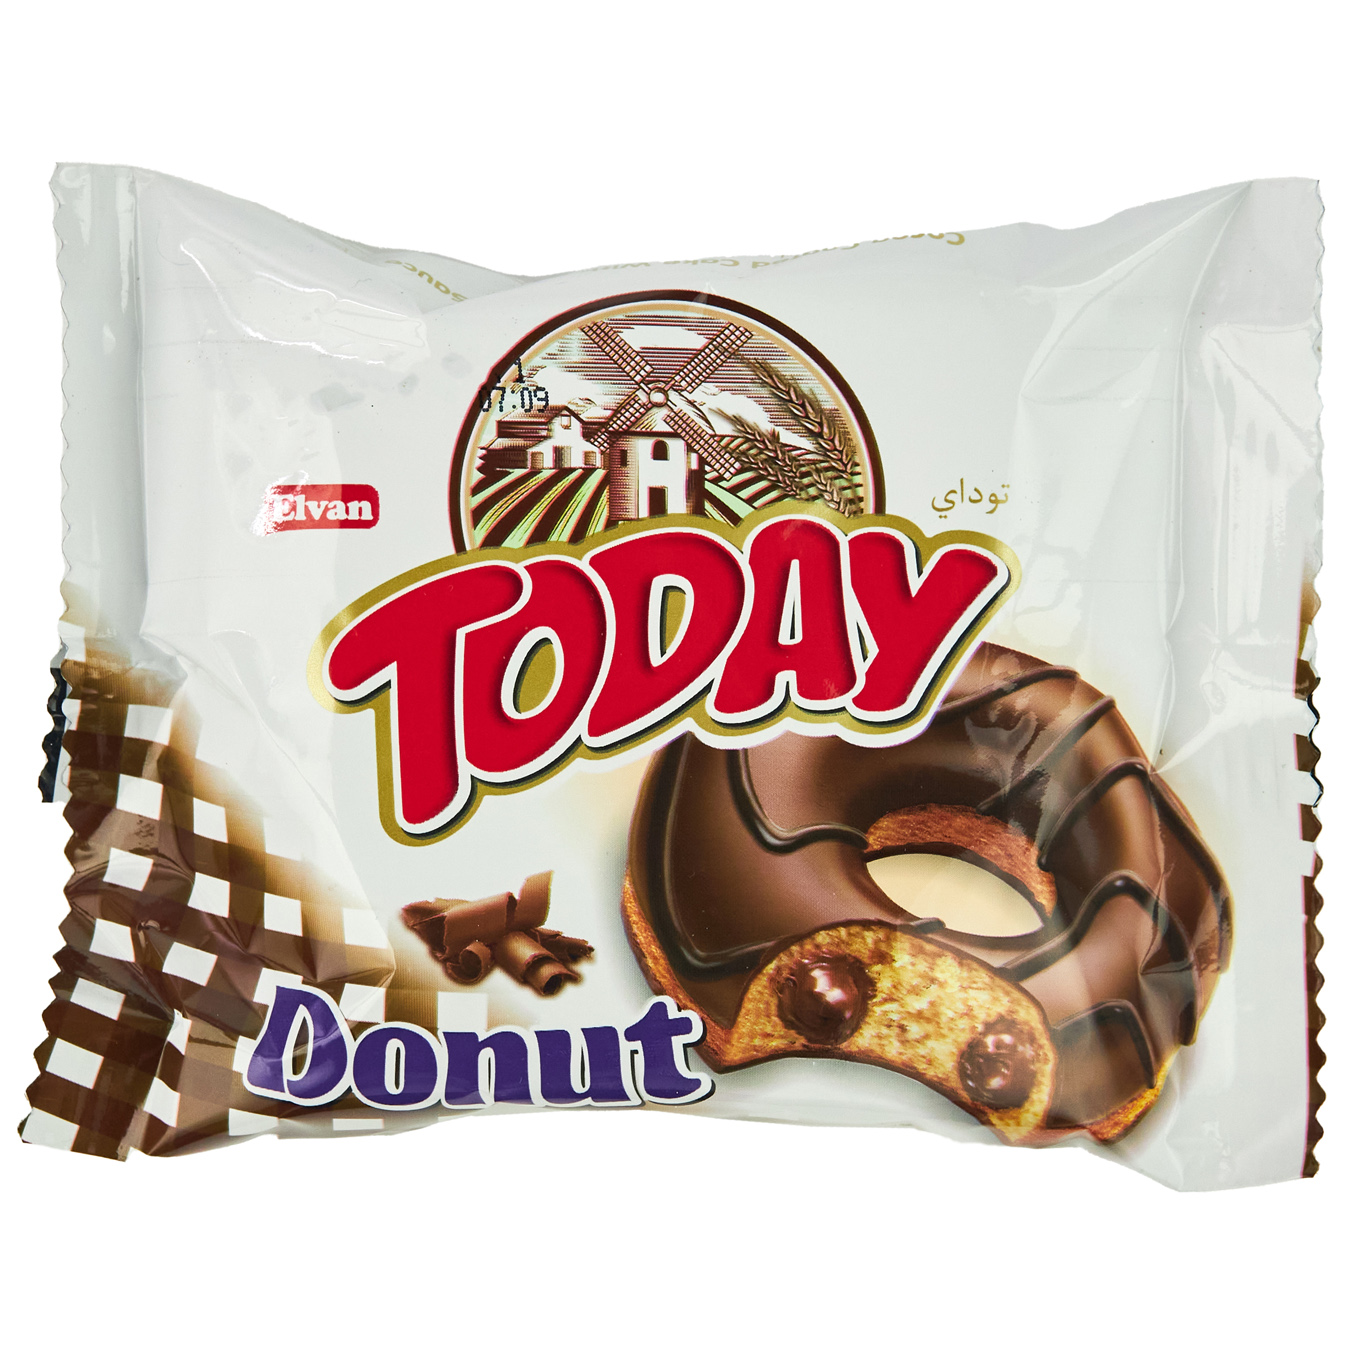 Today donut with chocolate filling 50g